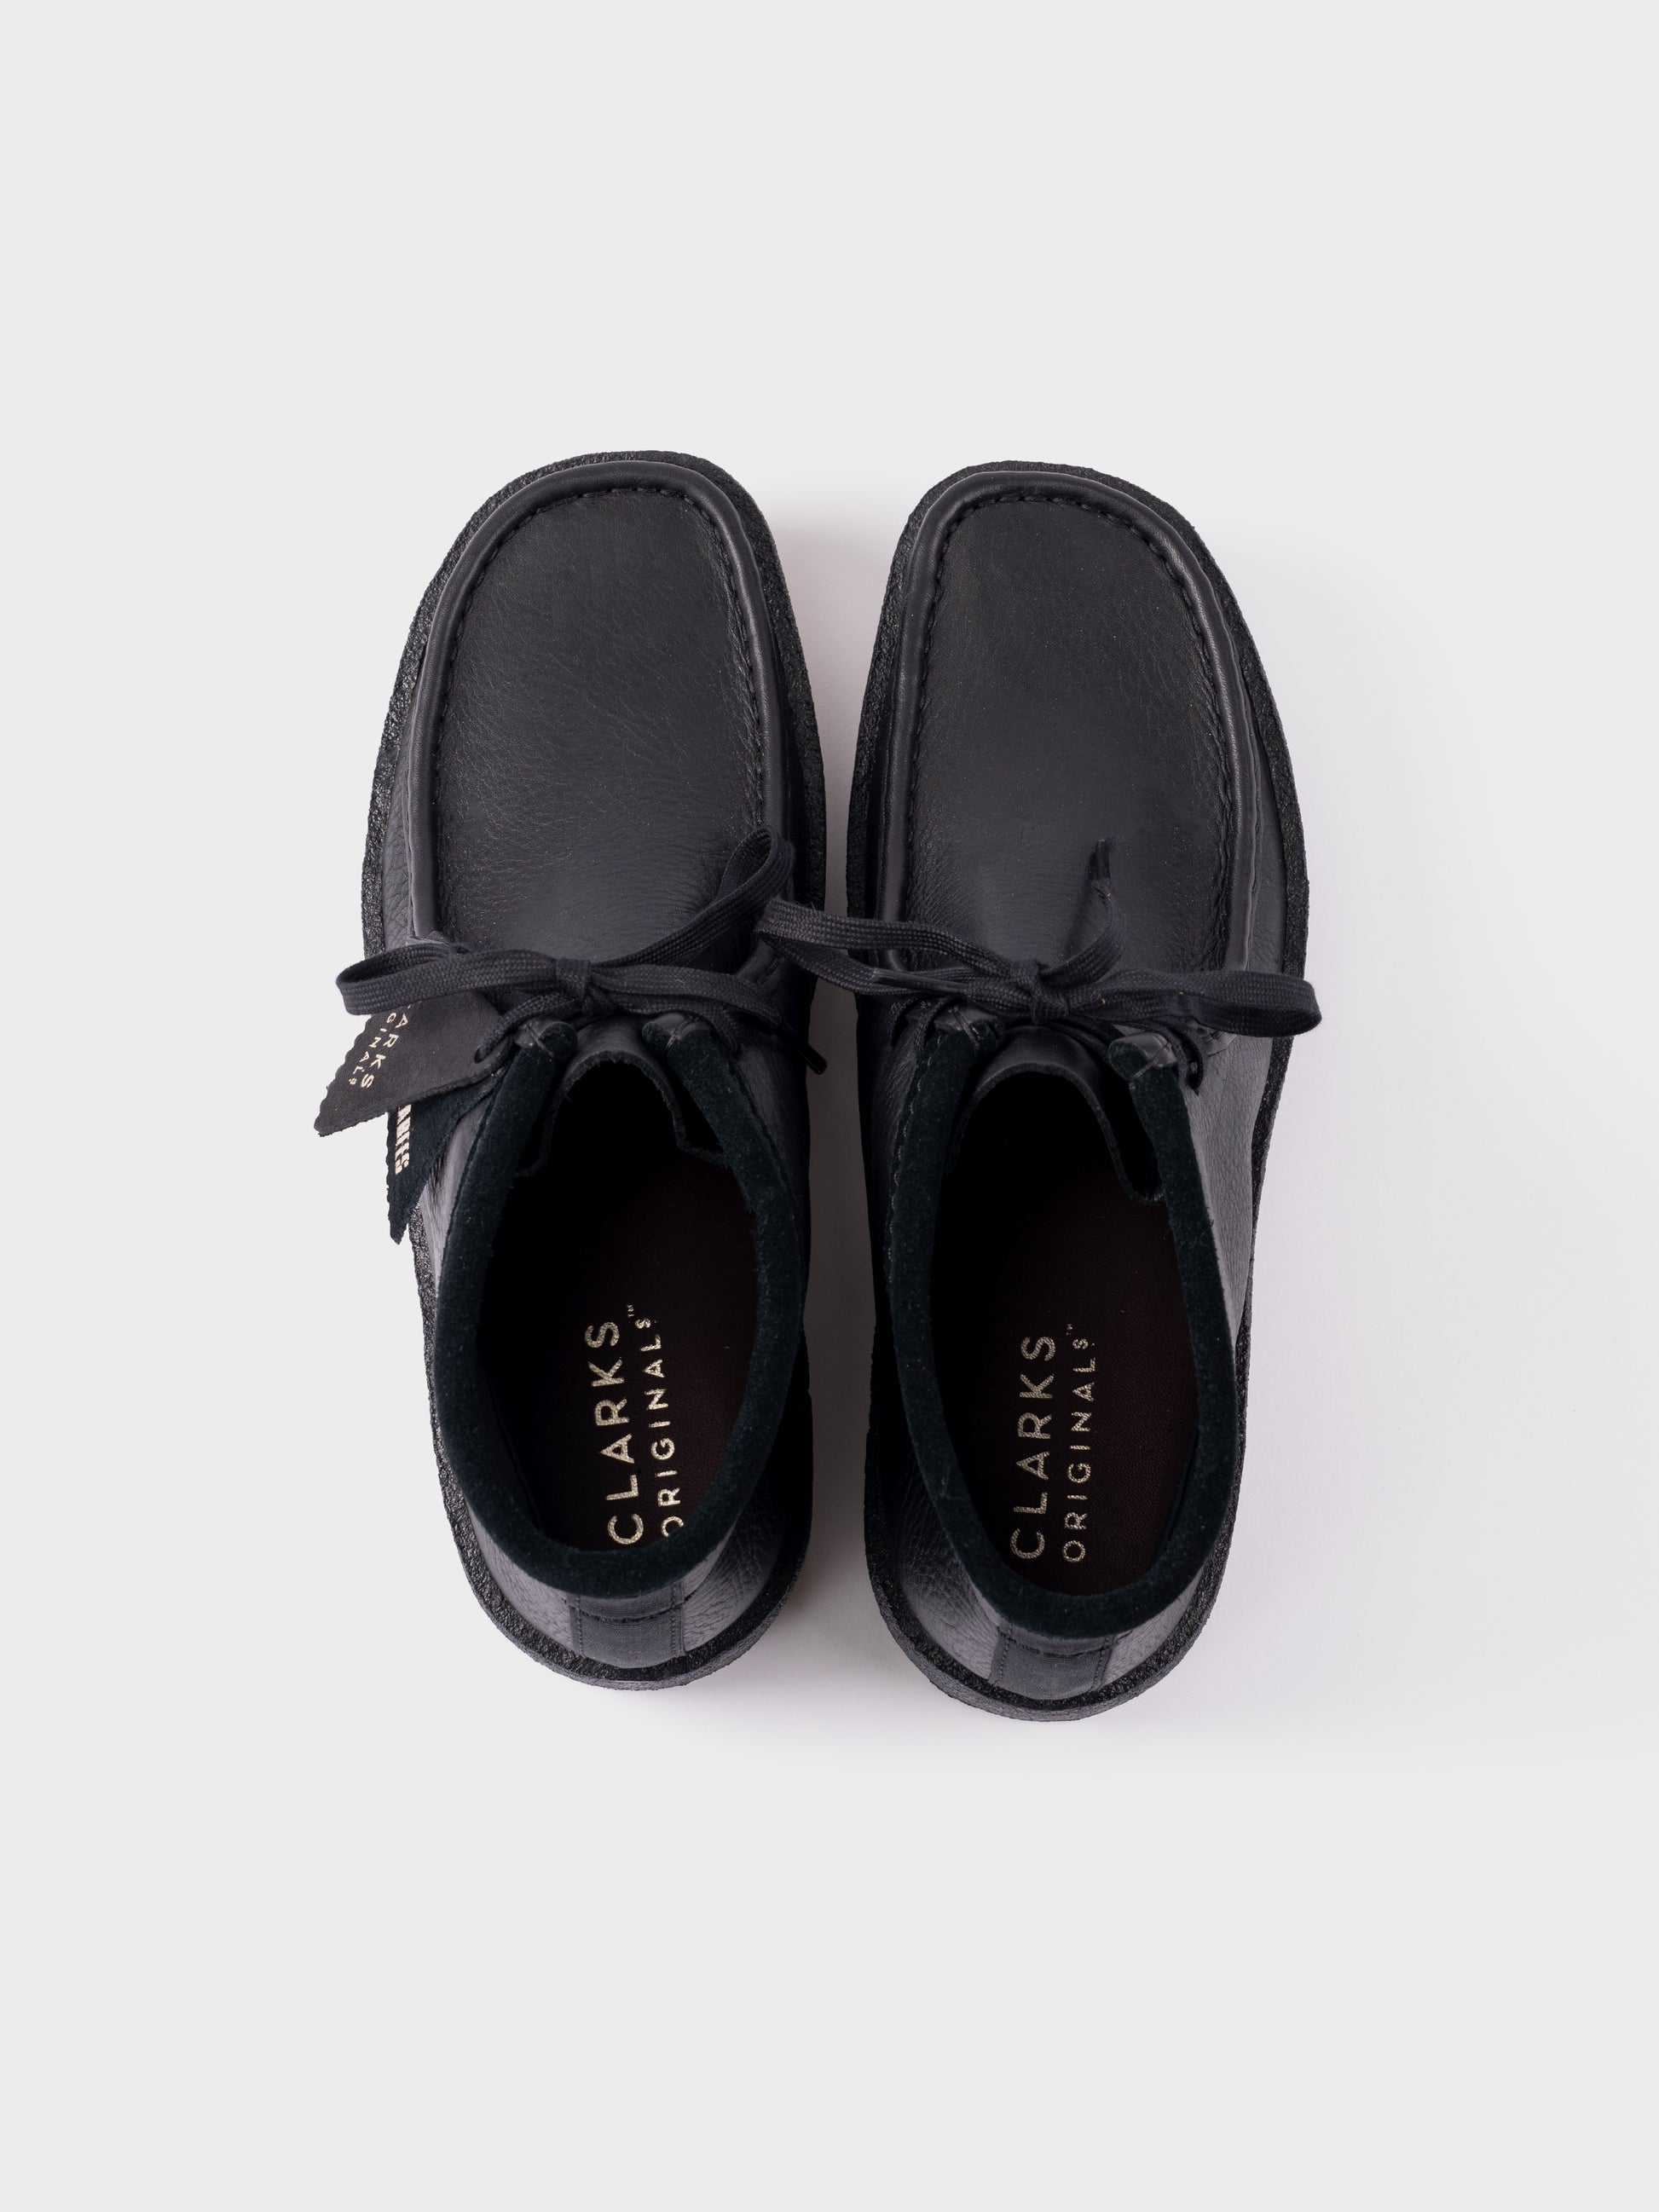 Clarks Originals Wallabee Cup Boots - Black Leather